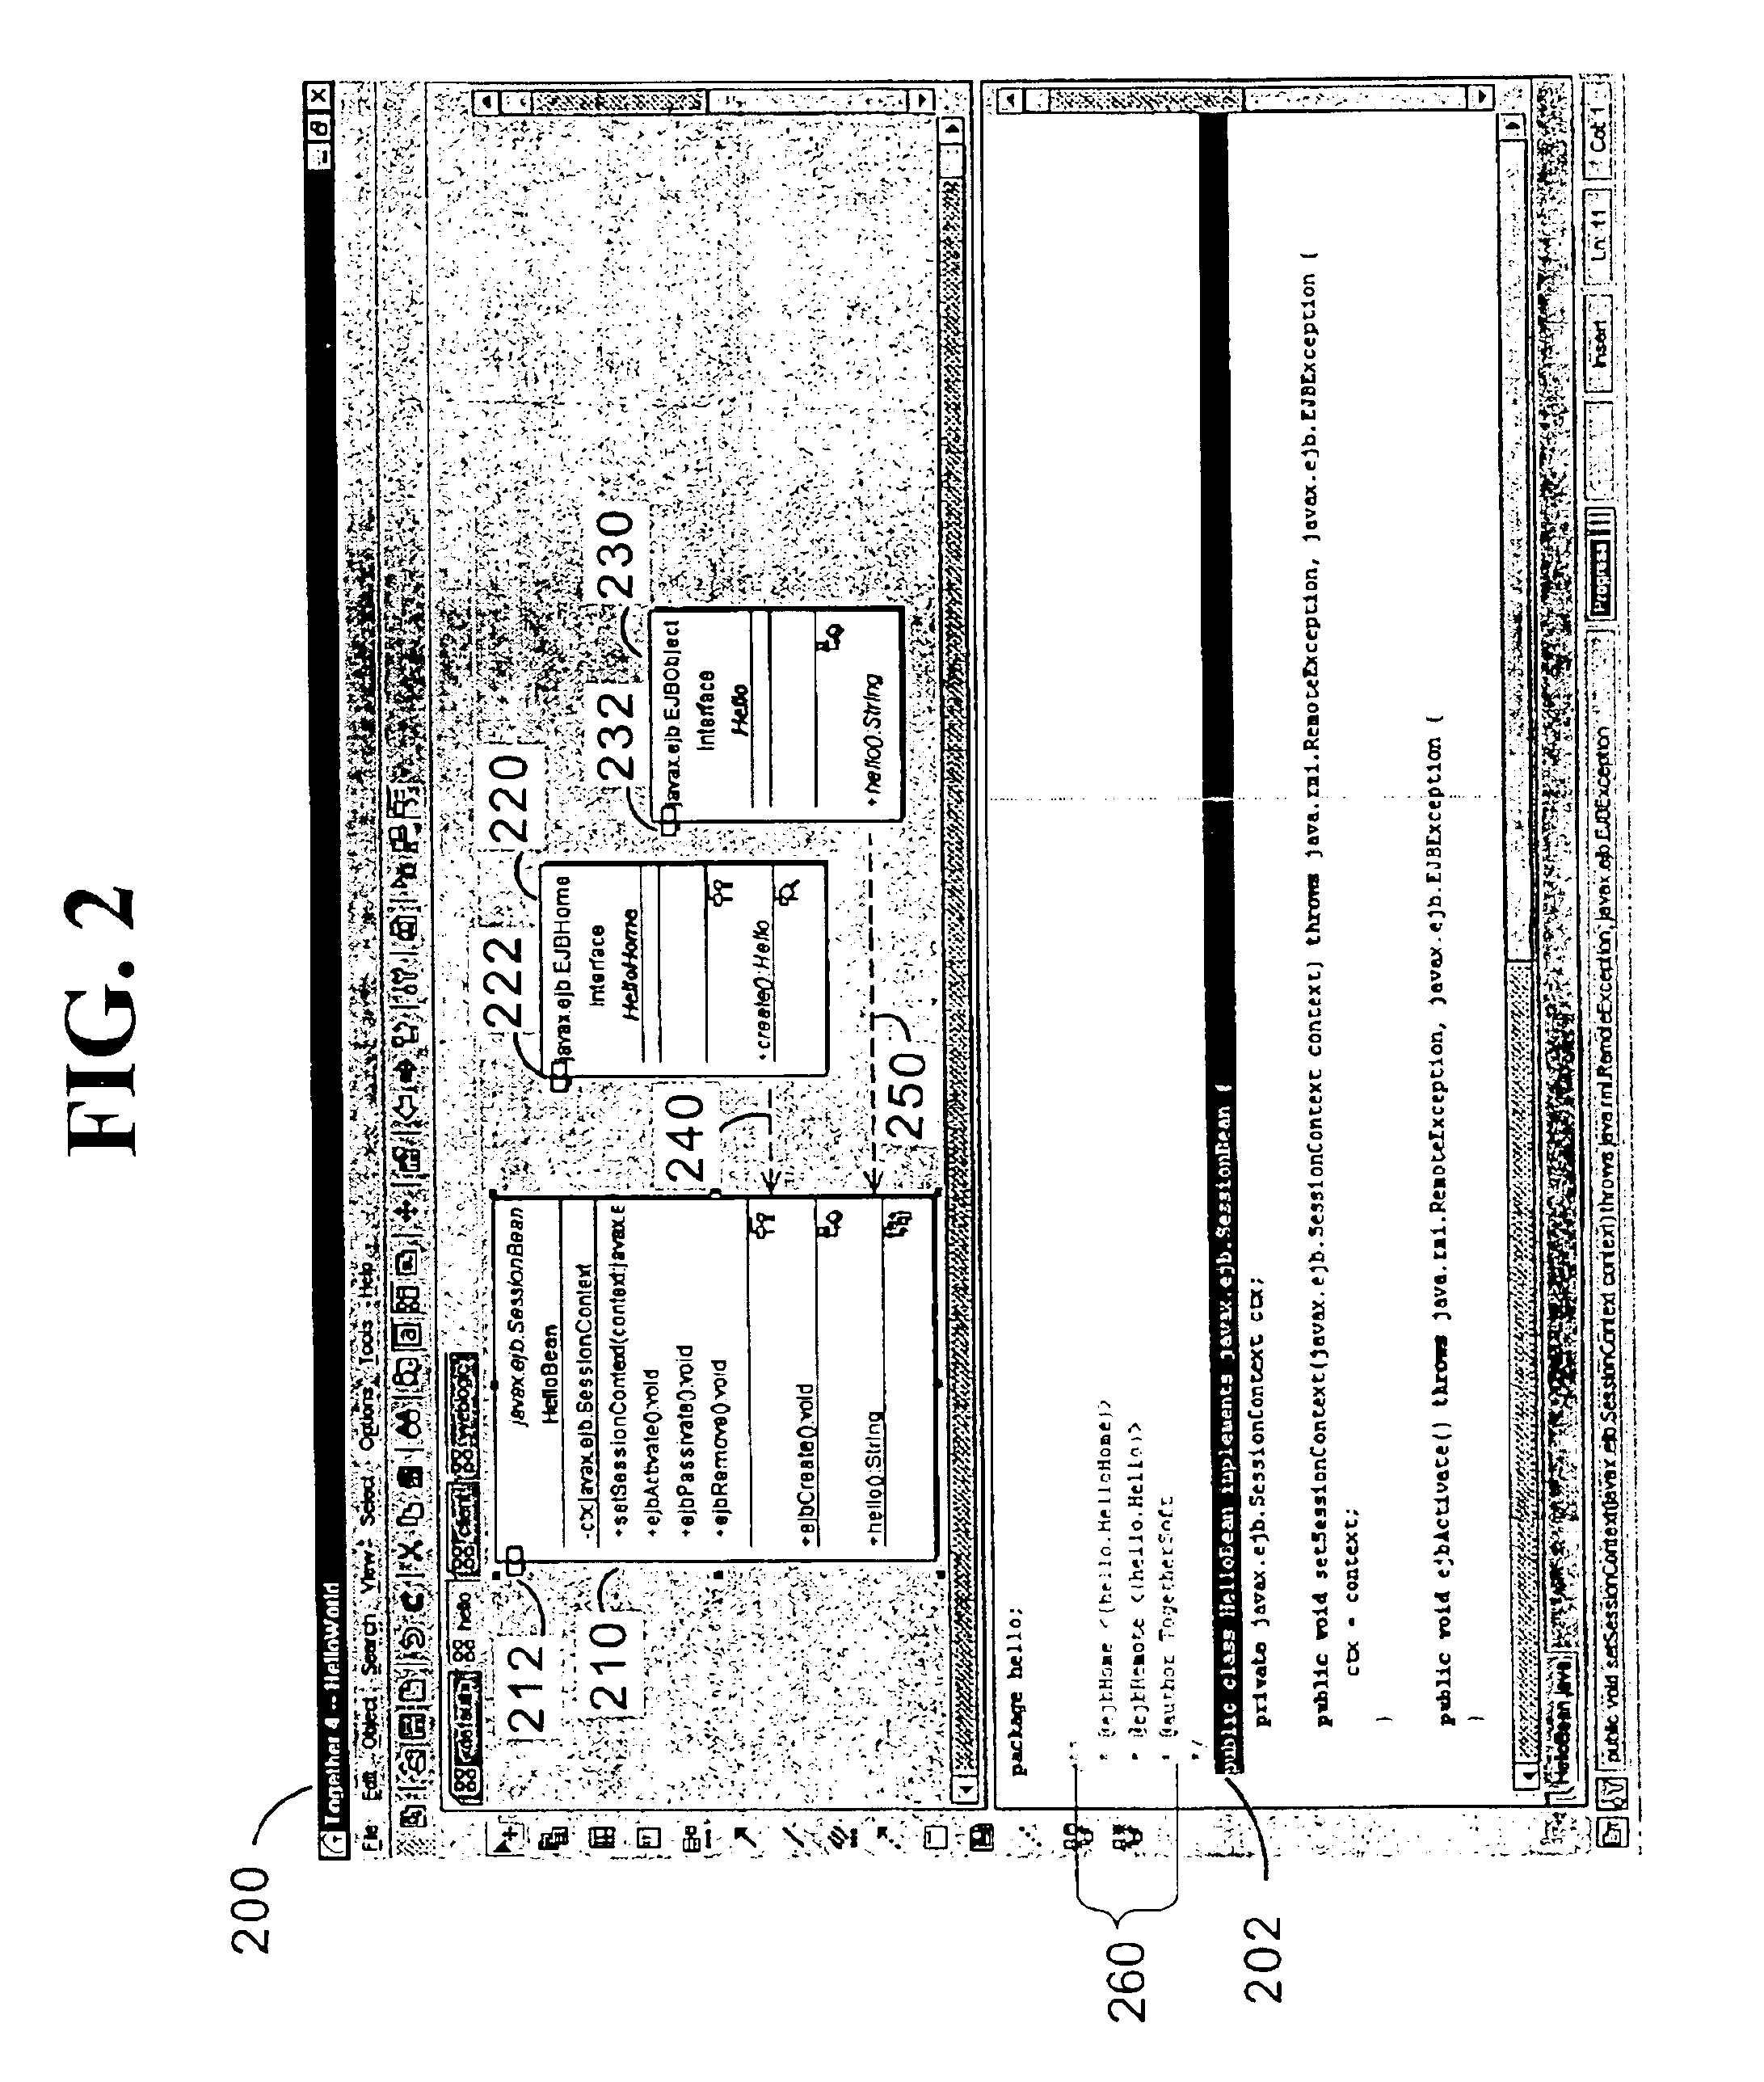 Method and system for collapsing a graphical representation of related elements